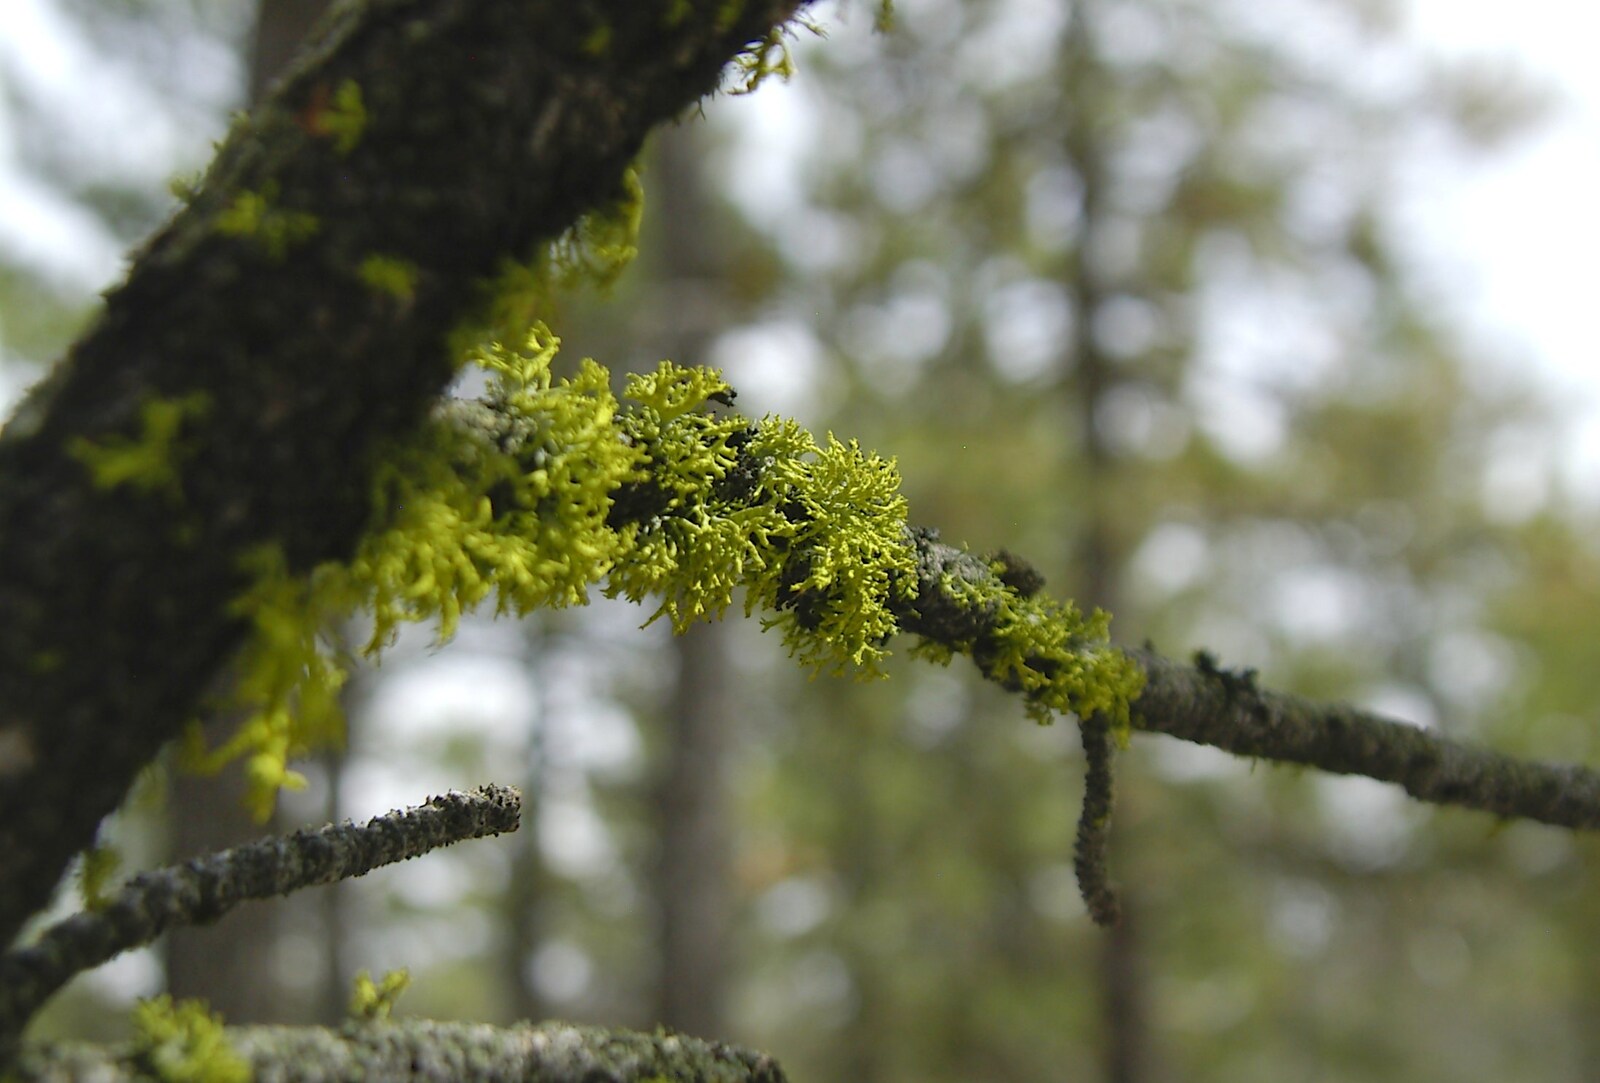 More tree moss from California Snow: San Bernadino State Forest, California, US - 26th March 2006